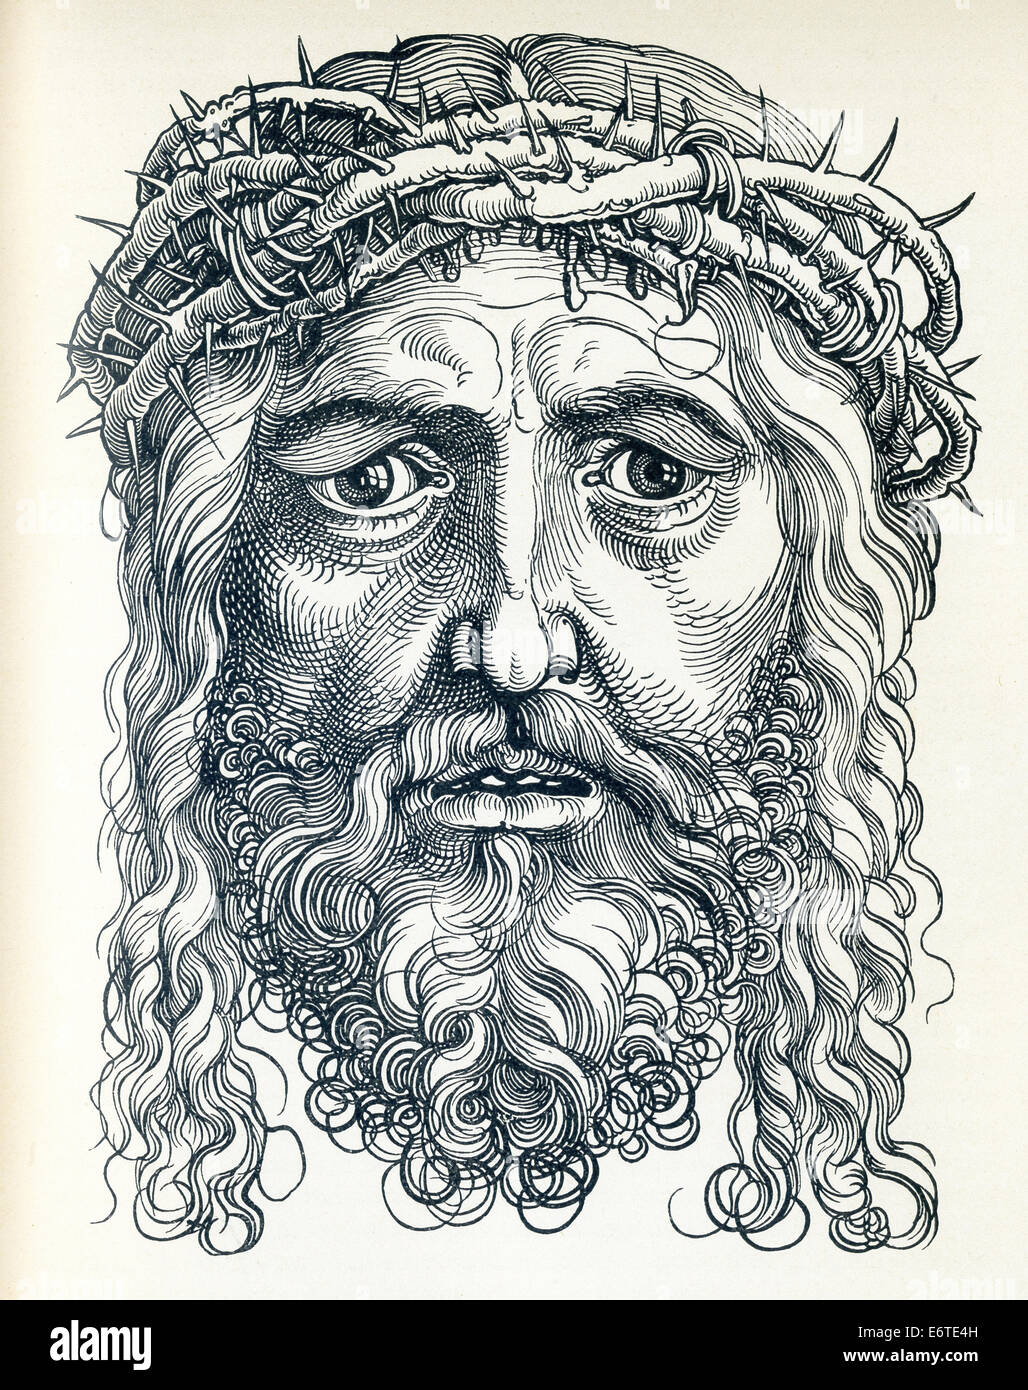 This head of Jesus Christ was done by Albrecht Durer, a German painter and engraver, who lived from 1471 to 1528. Stock Photo